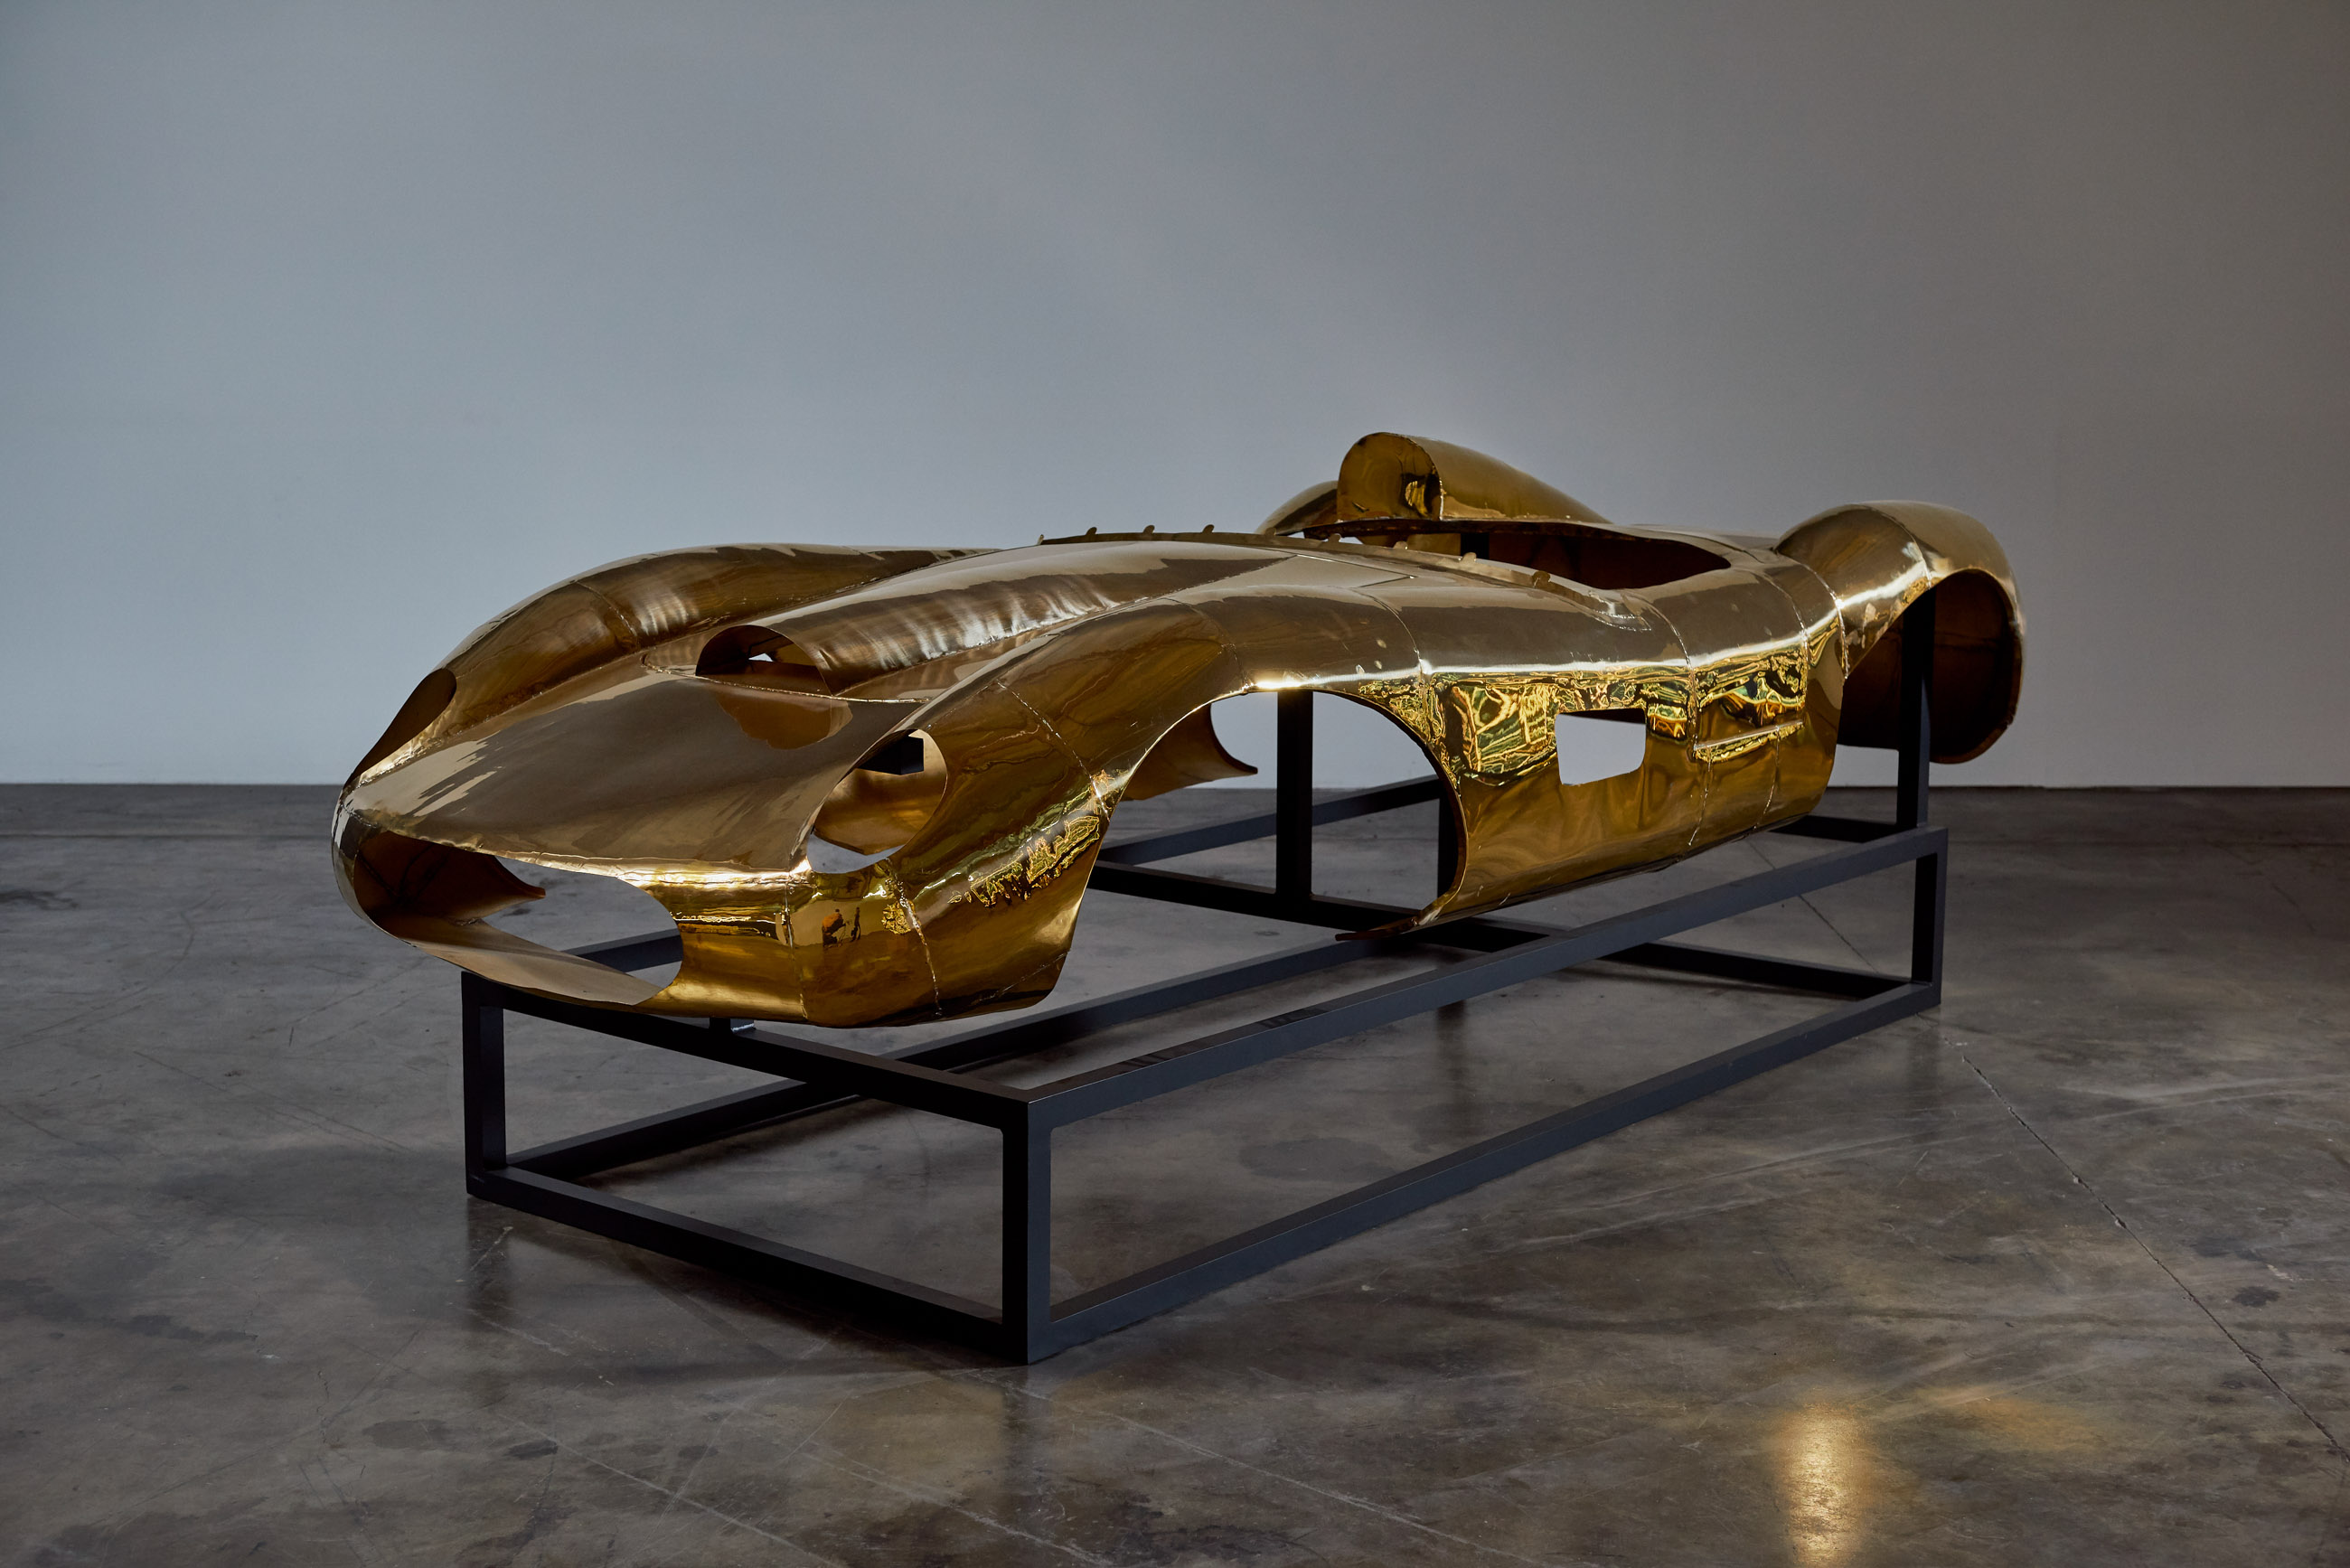 Anthony James, an artist based in Los Angeles, created this bronze rendition of a&nbsp;1957 Ferrari 250 Testa Rossa.&nbsp;